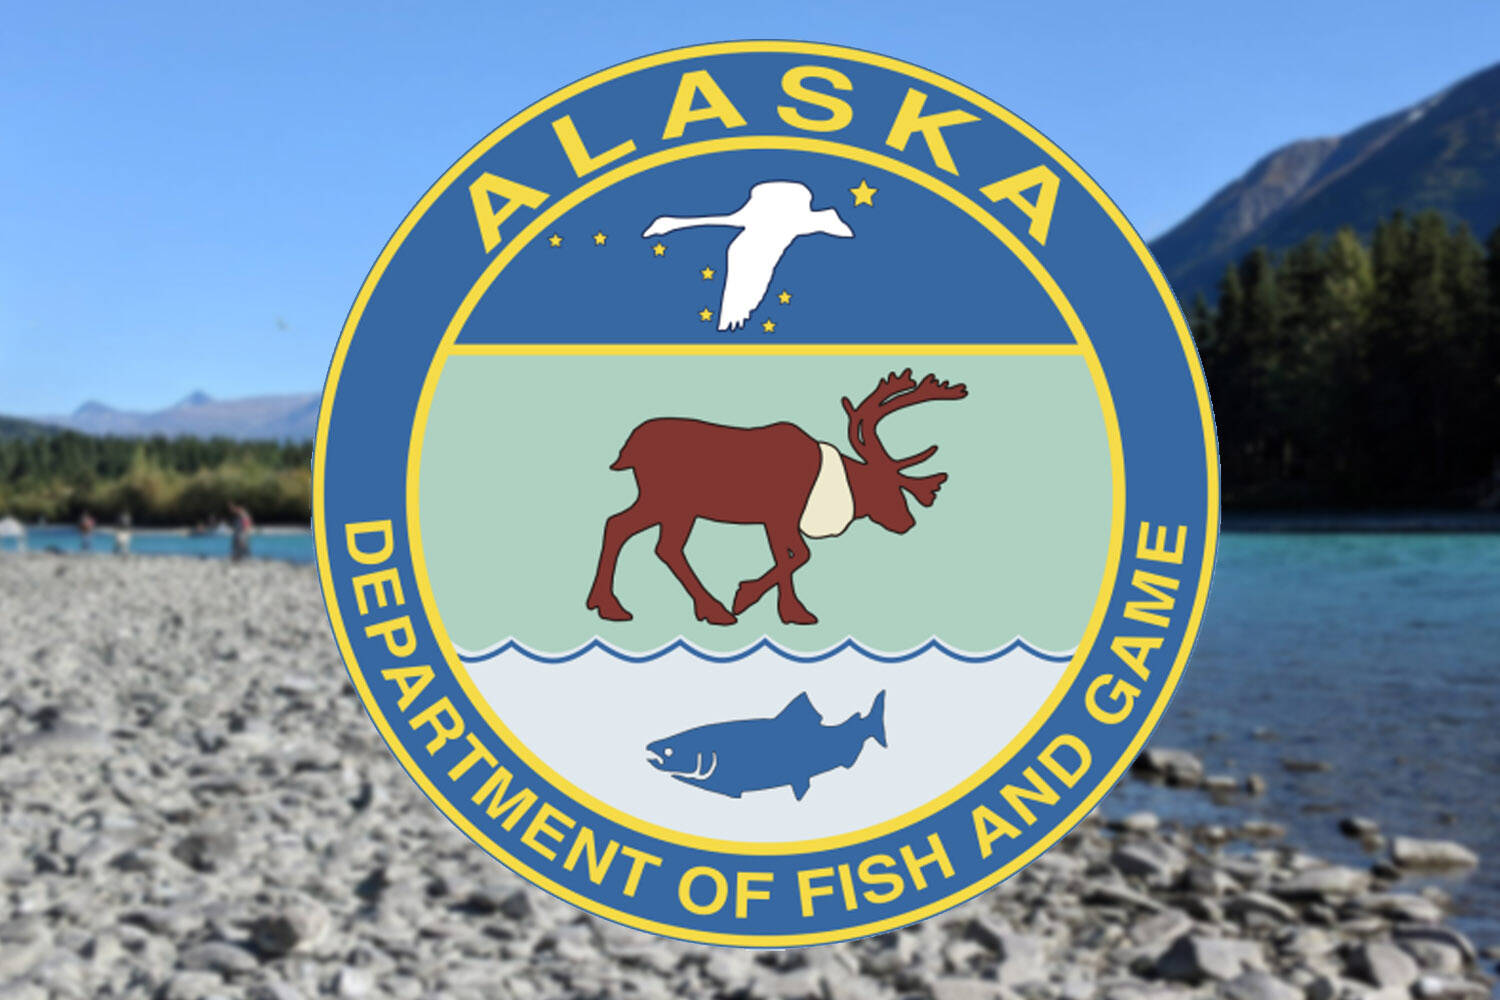 Alaska Department of Fish and Game logo. (Graphic by Jake Dye)